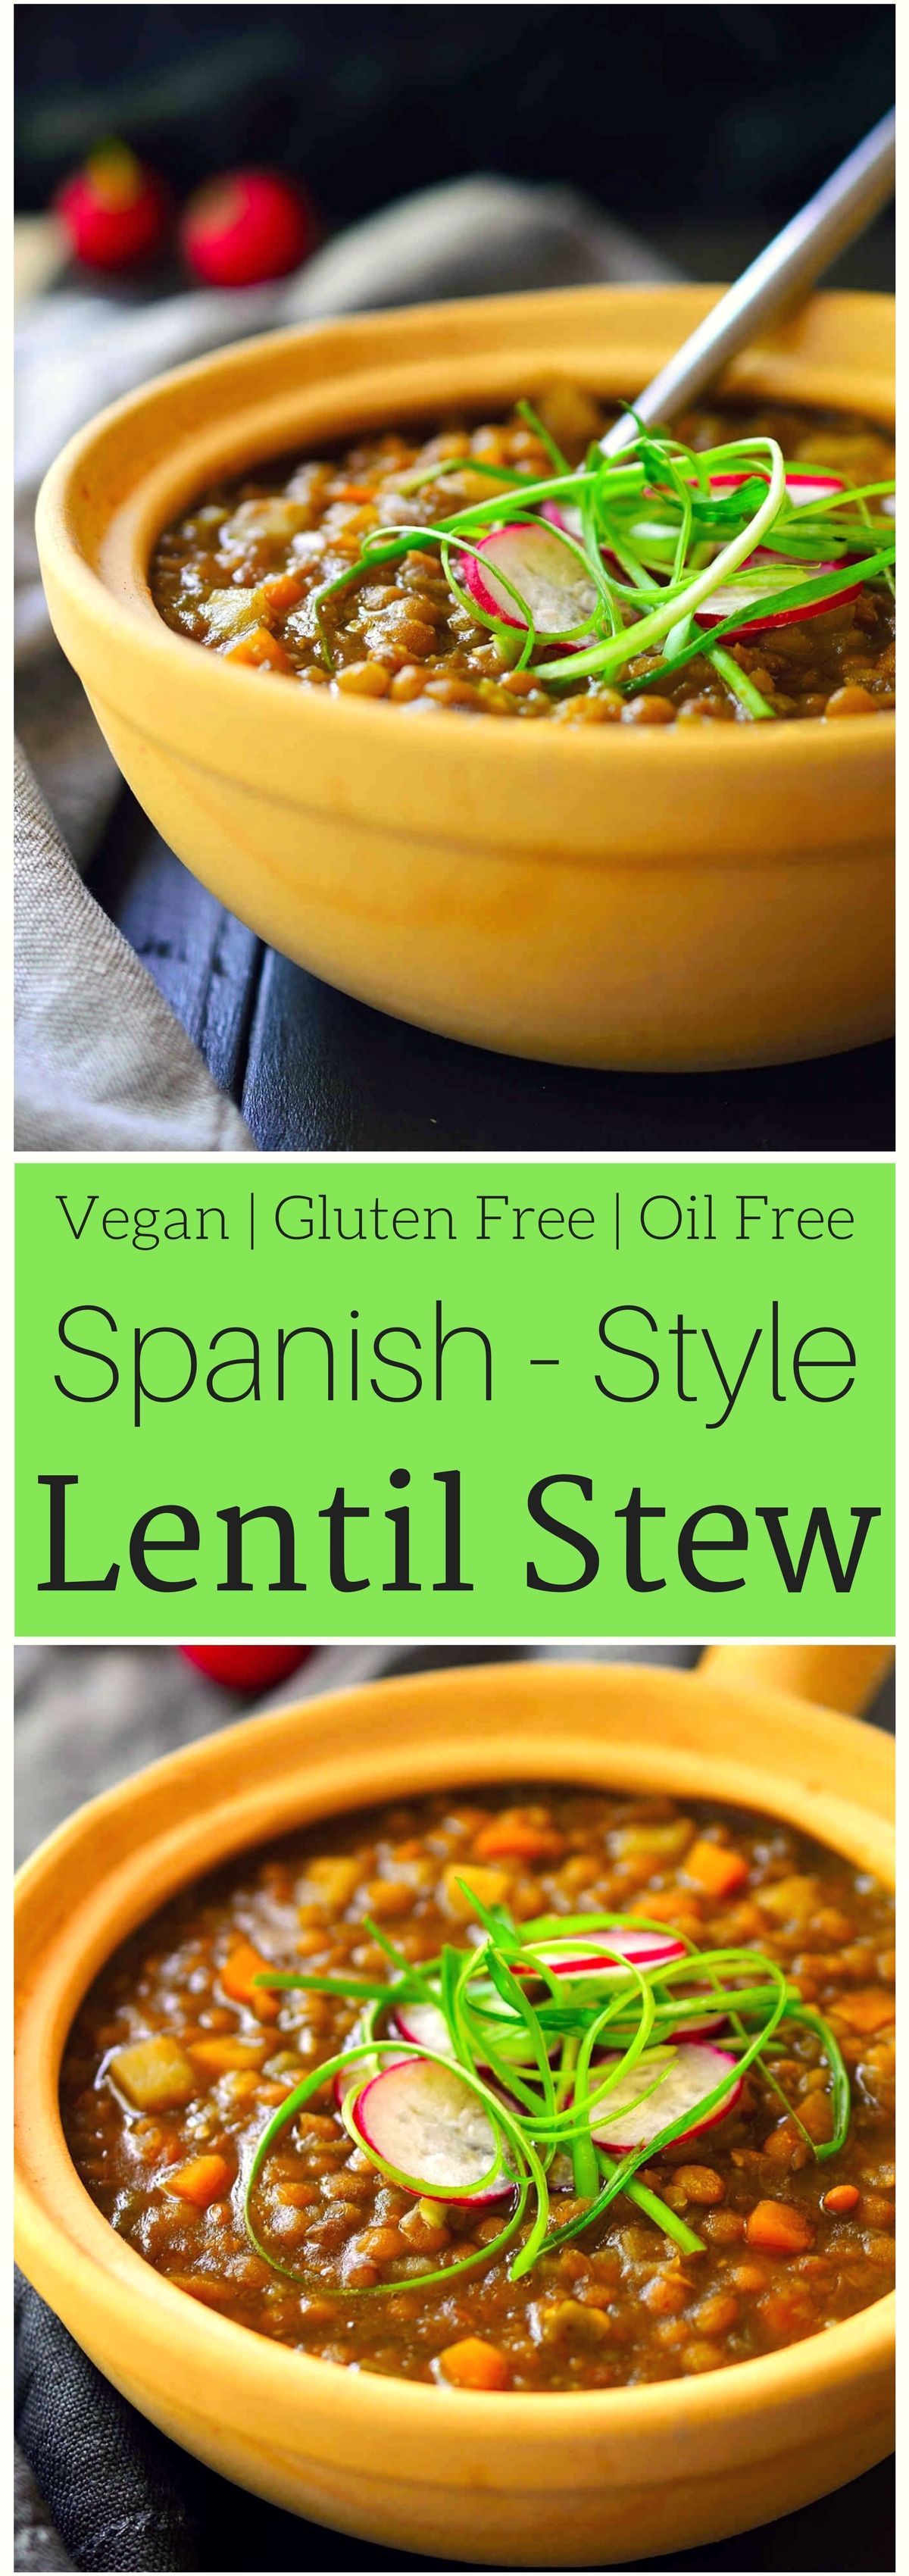 This Spanish-style vegan lentil stew is easy to make with very simple ingredients and perfect for vegans on a serious budget. Hearty and comforting, this oil-free recipe is great as a plant-based main dish for chilly evenings or as a side for a summer barbeque or picnic. It’s a freezer-friendly meal that comes in at only $0.50 a serving. -   18 vegetarian recipes freezer
 ideas